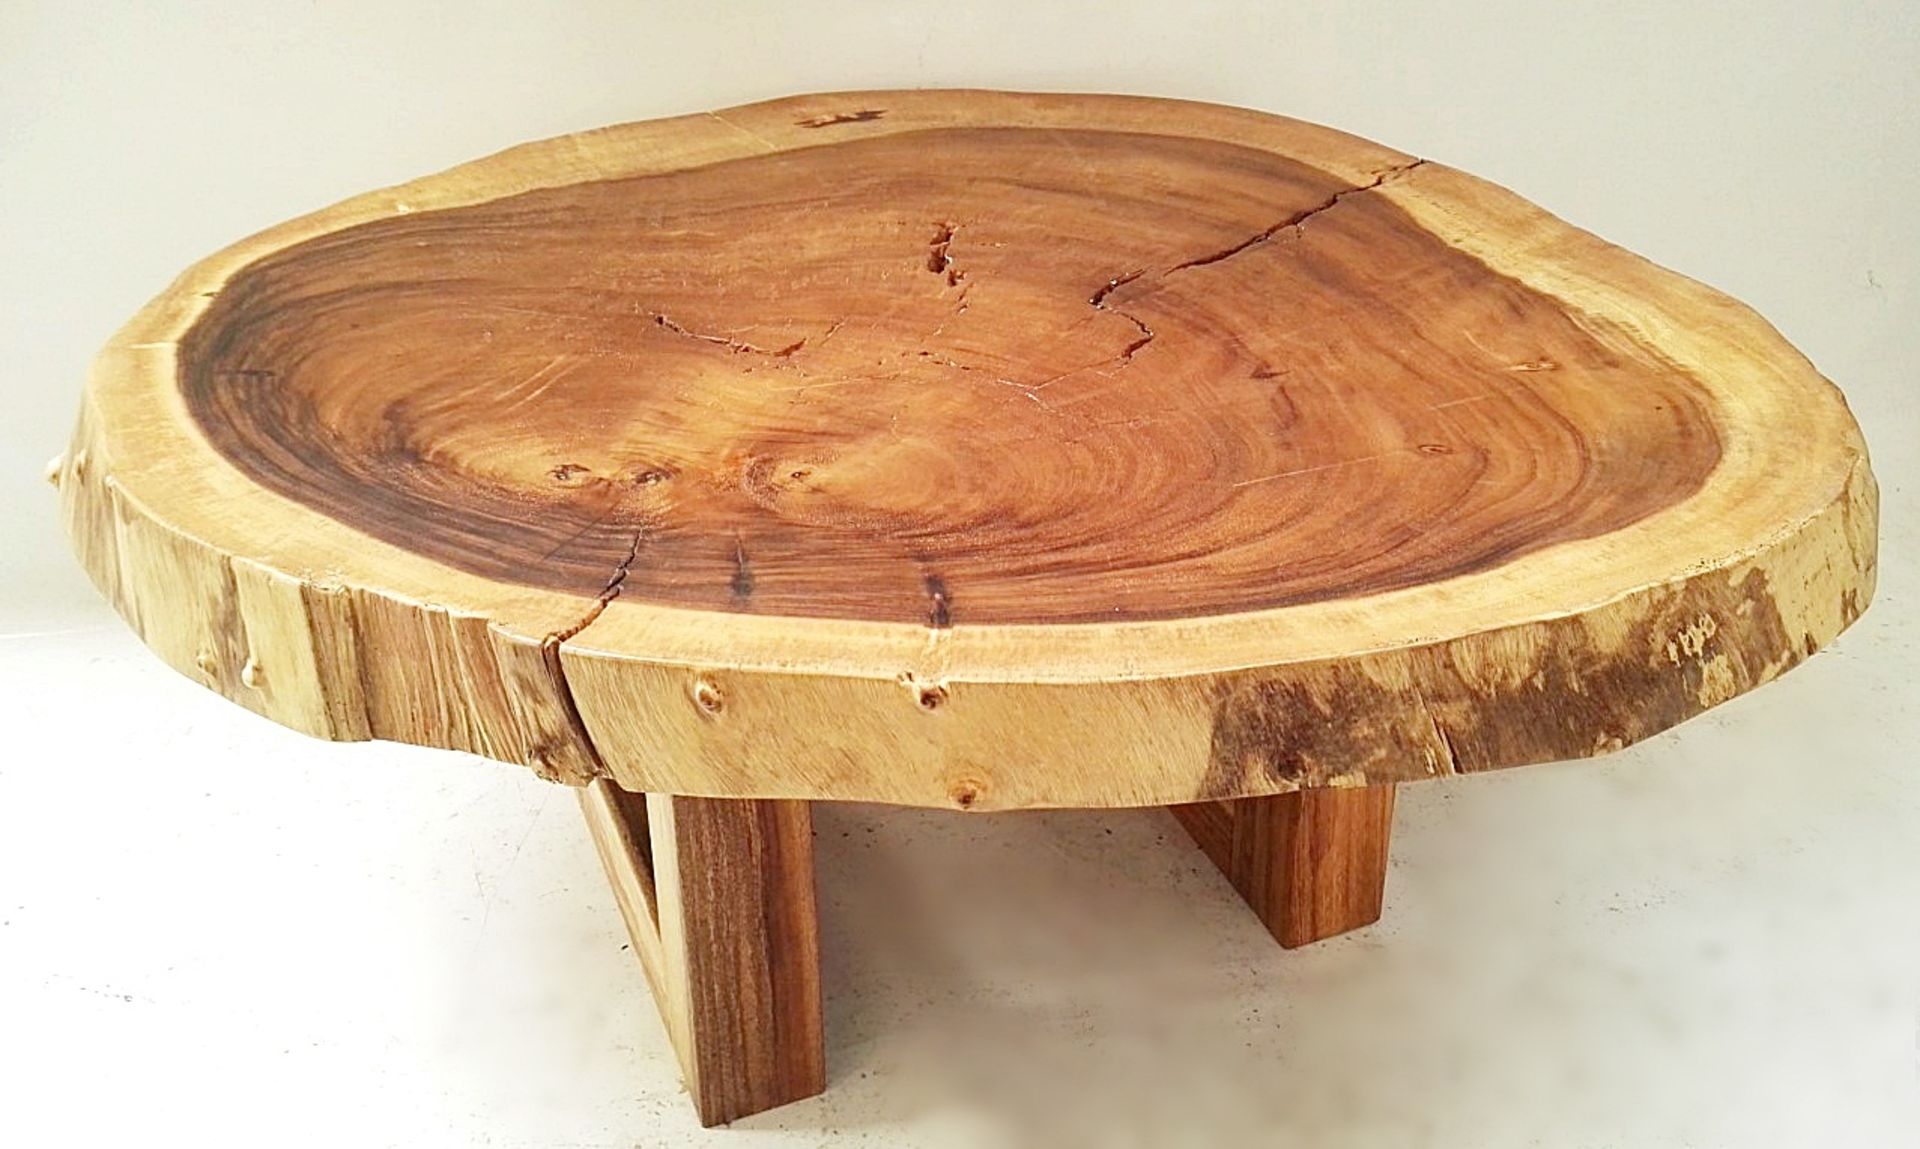 1 x Unique Reclaimed Solid Tree Trunk Coffee Table With Square Base